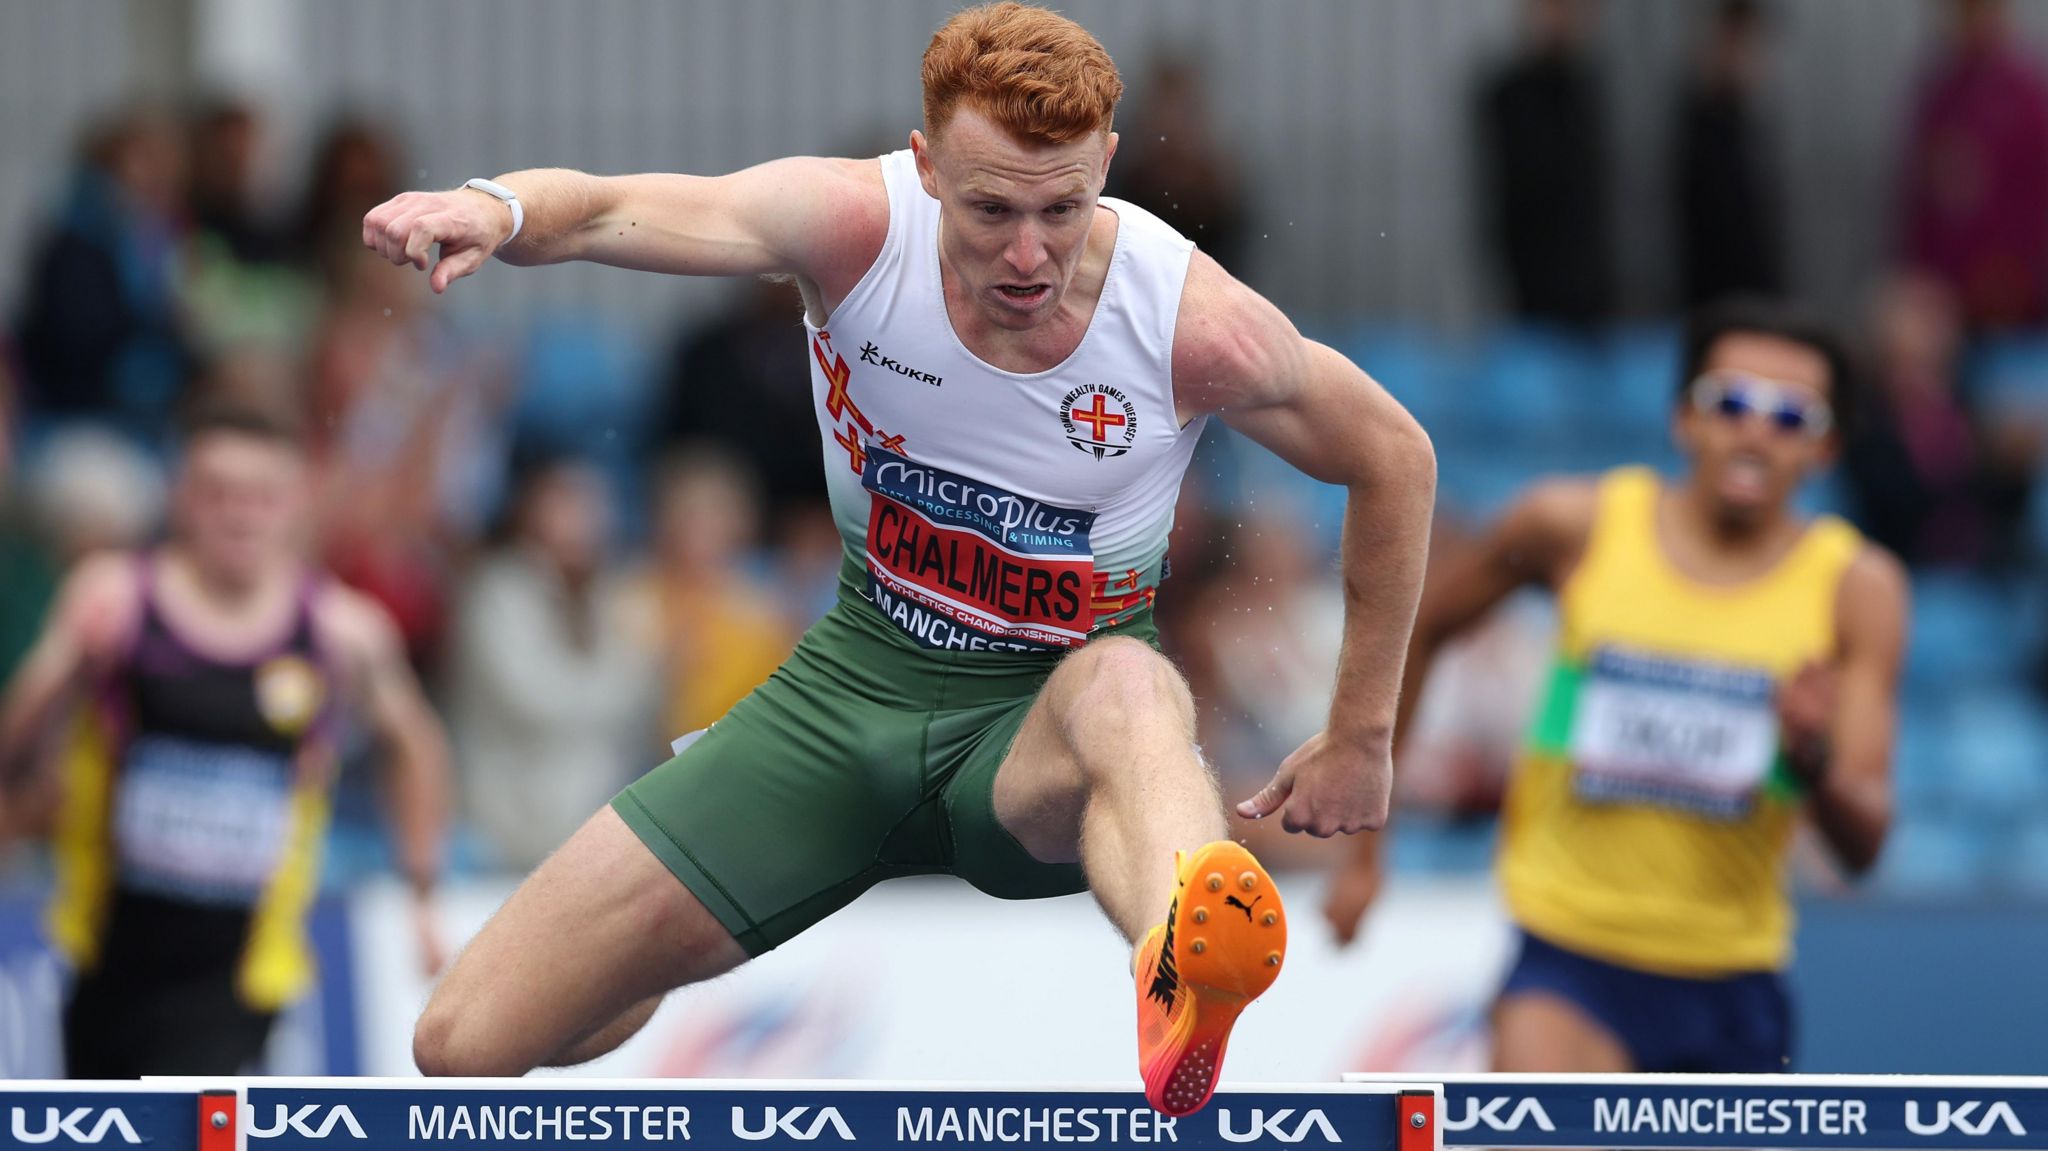 Alastair Chalmers competes at the British Championships